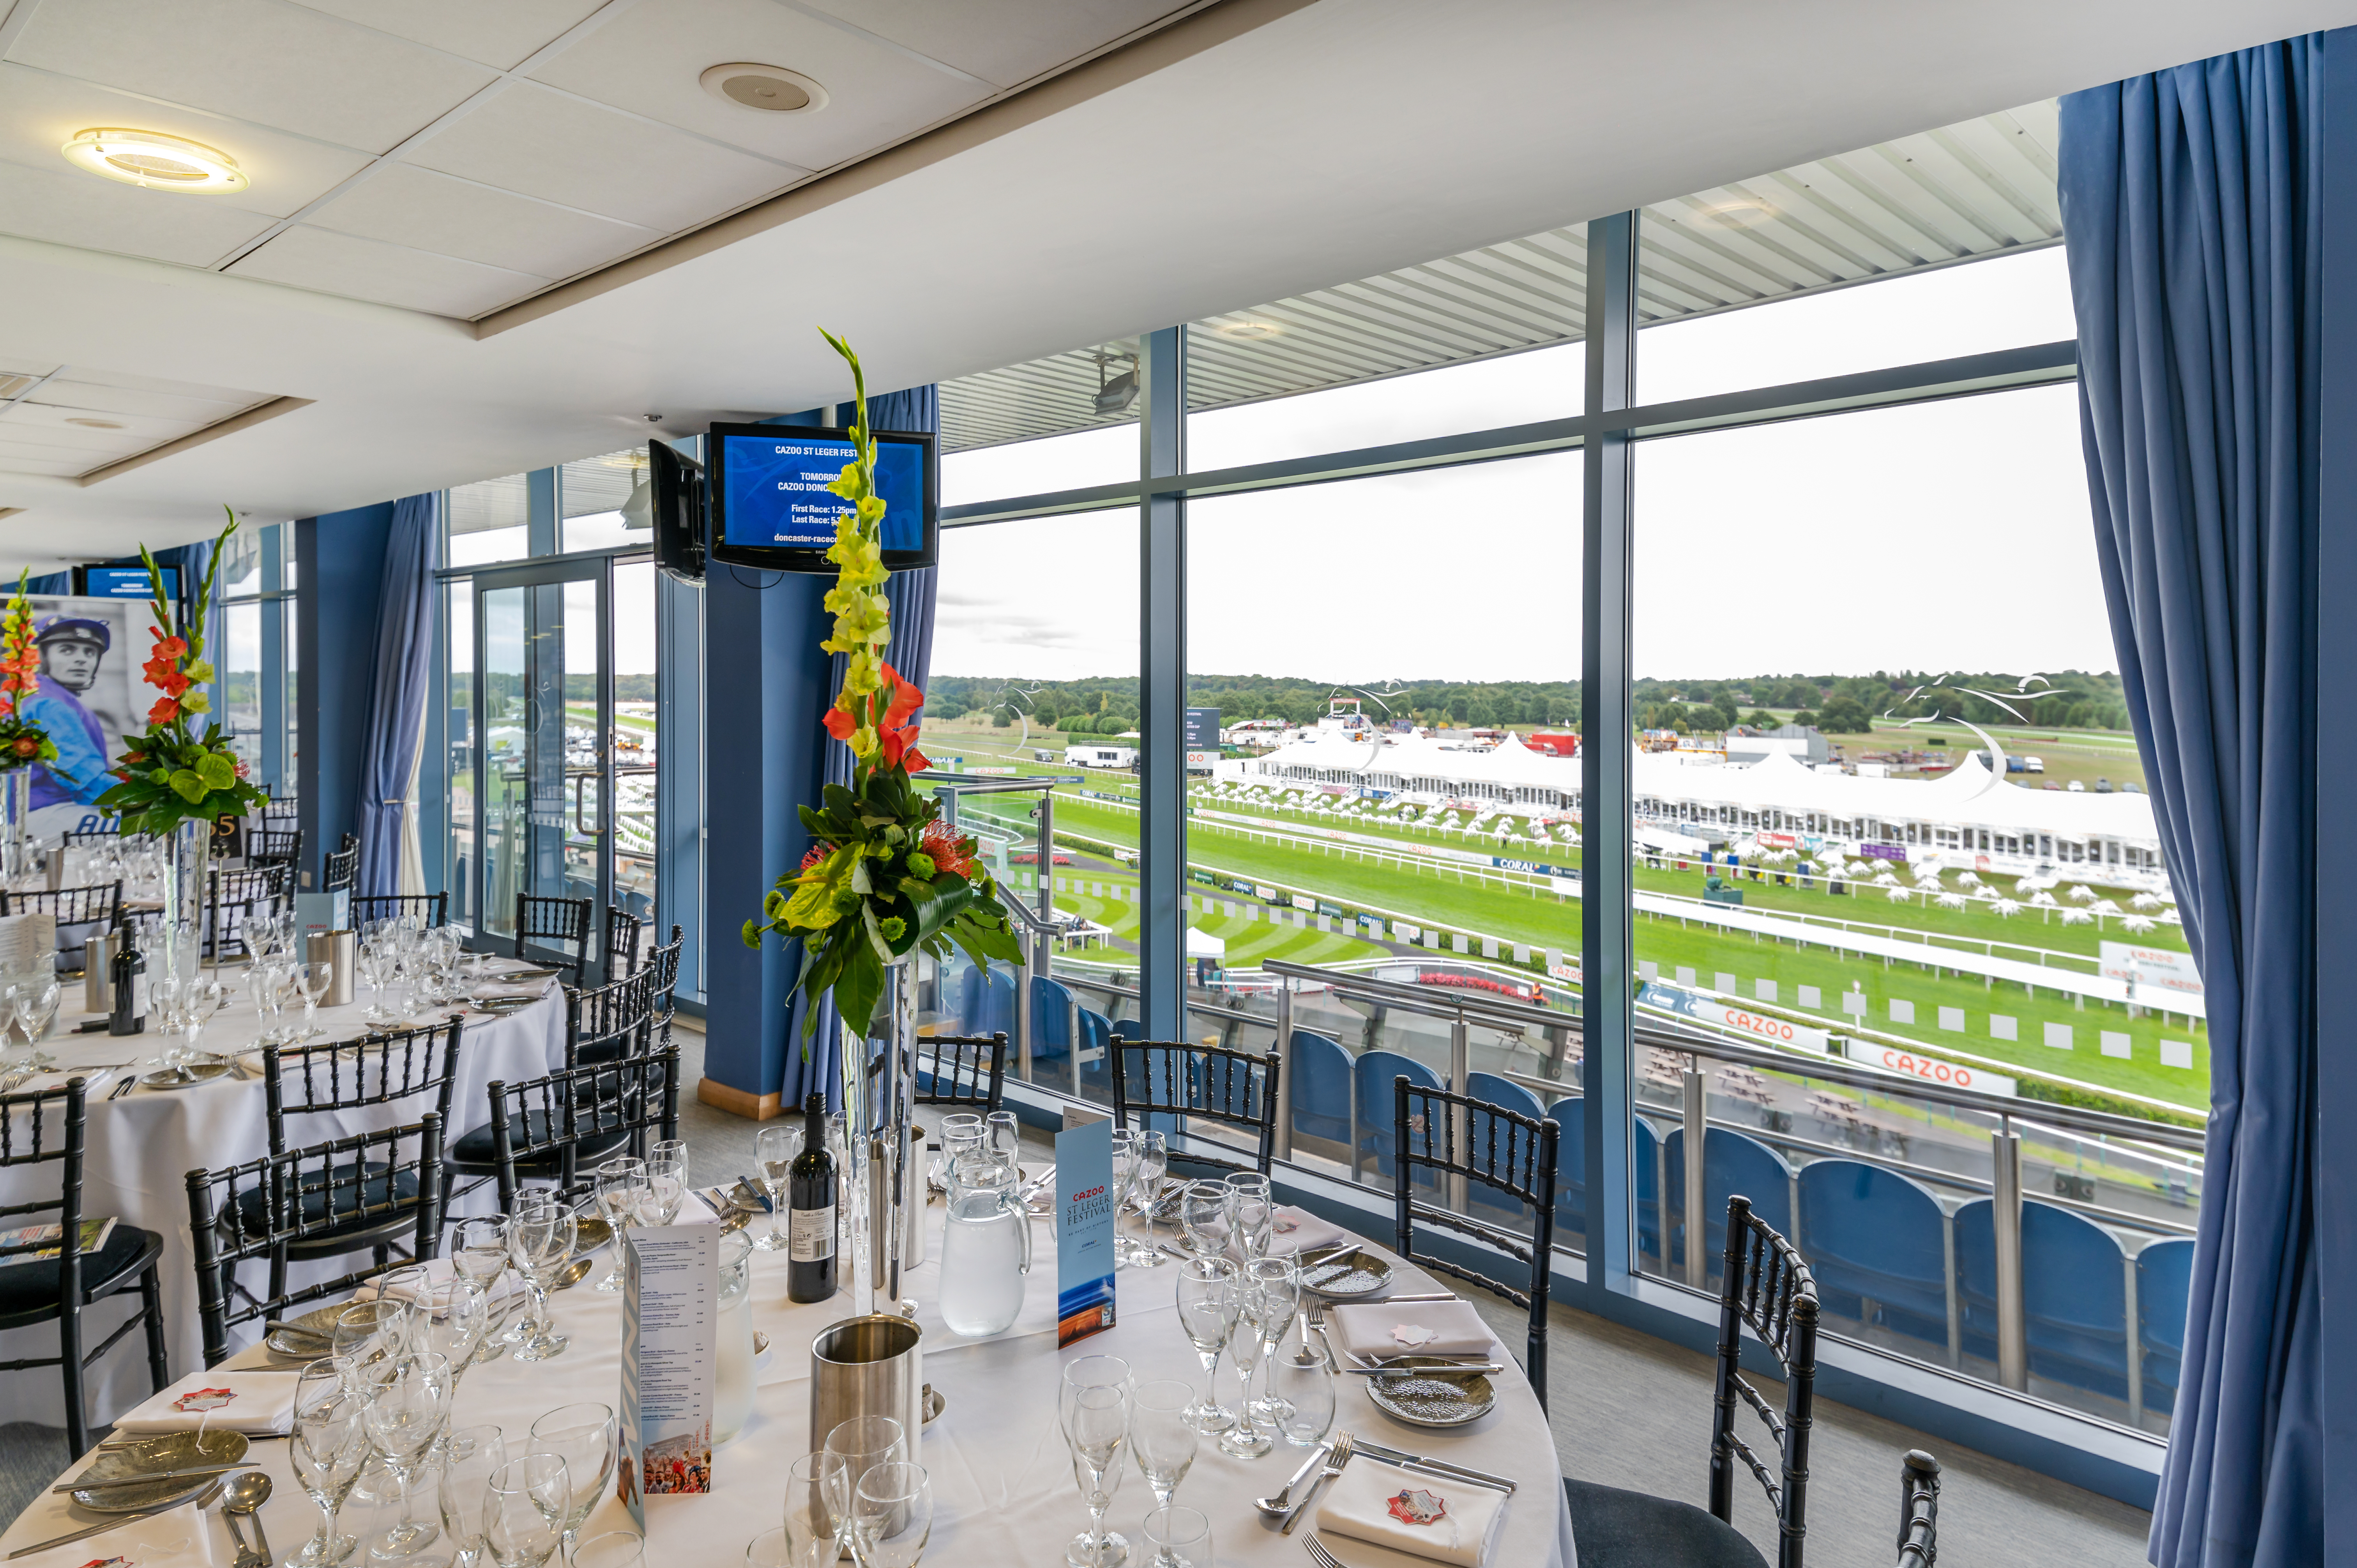 Doncaster Racecourse Home Straight hospitality suite